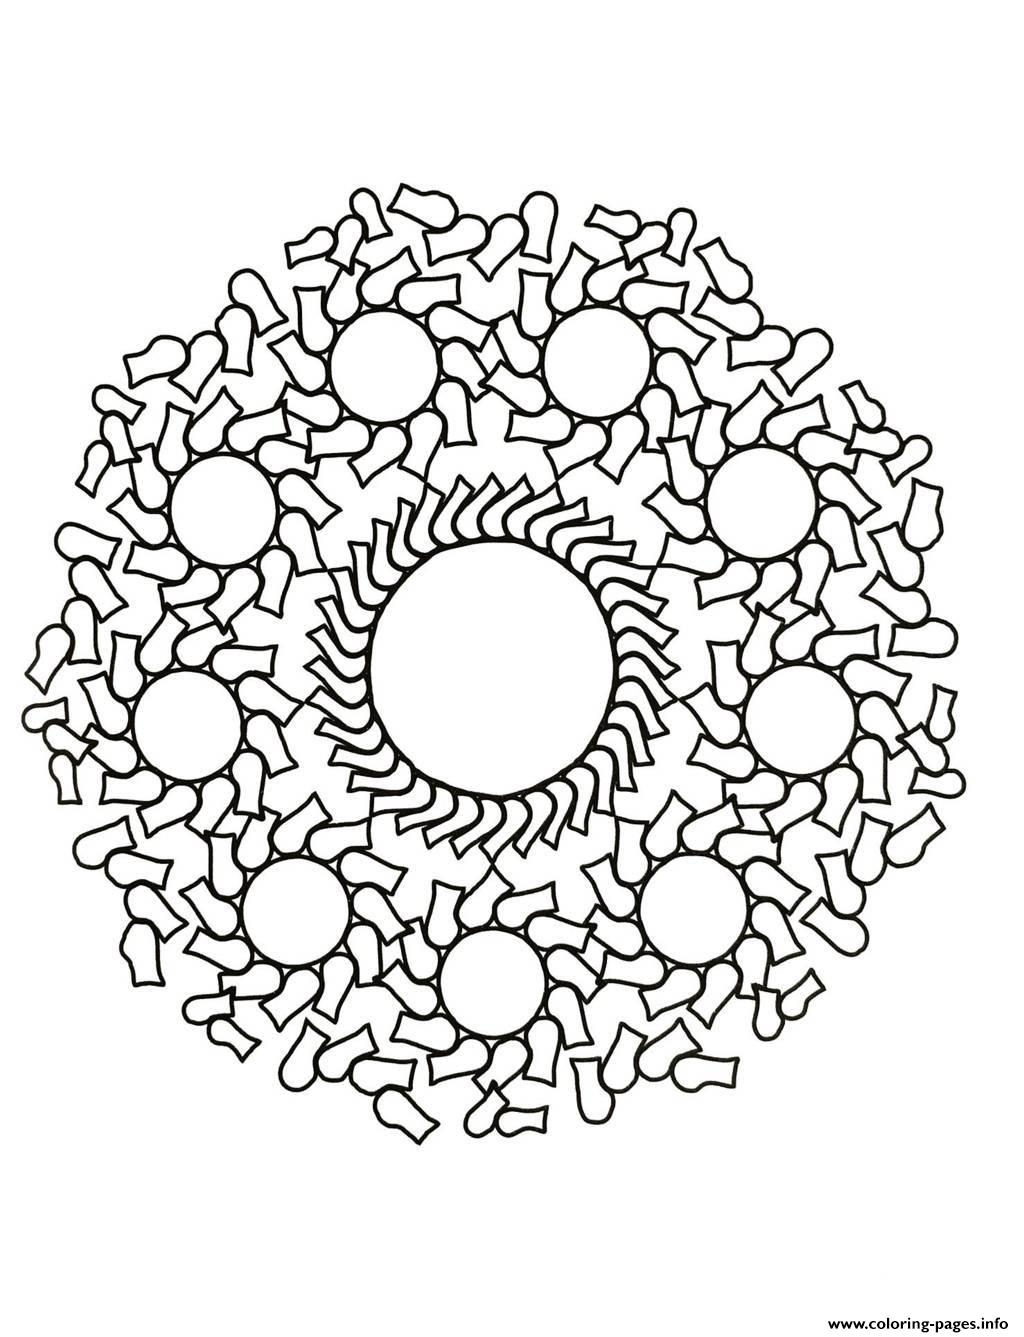 Mandalas To Download For Free 7  coloring